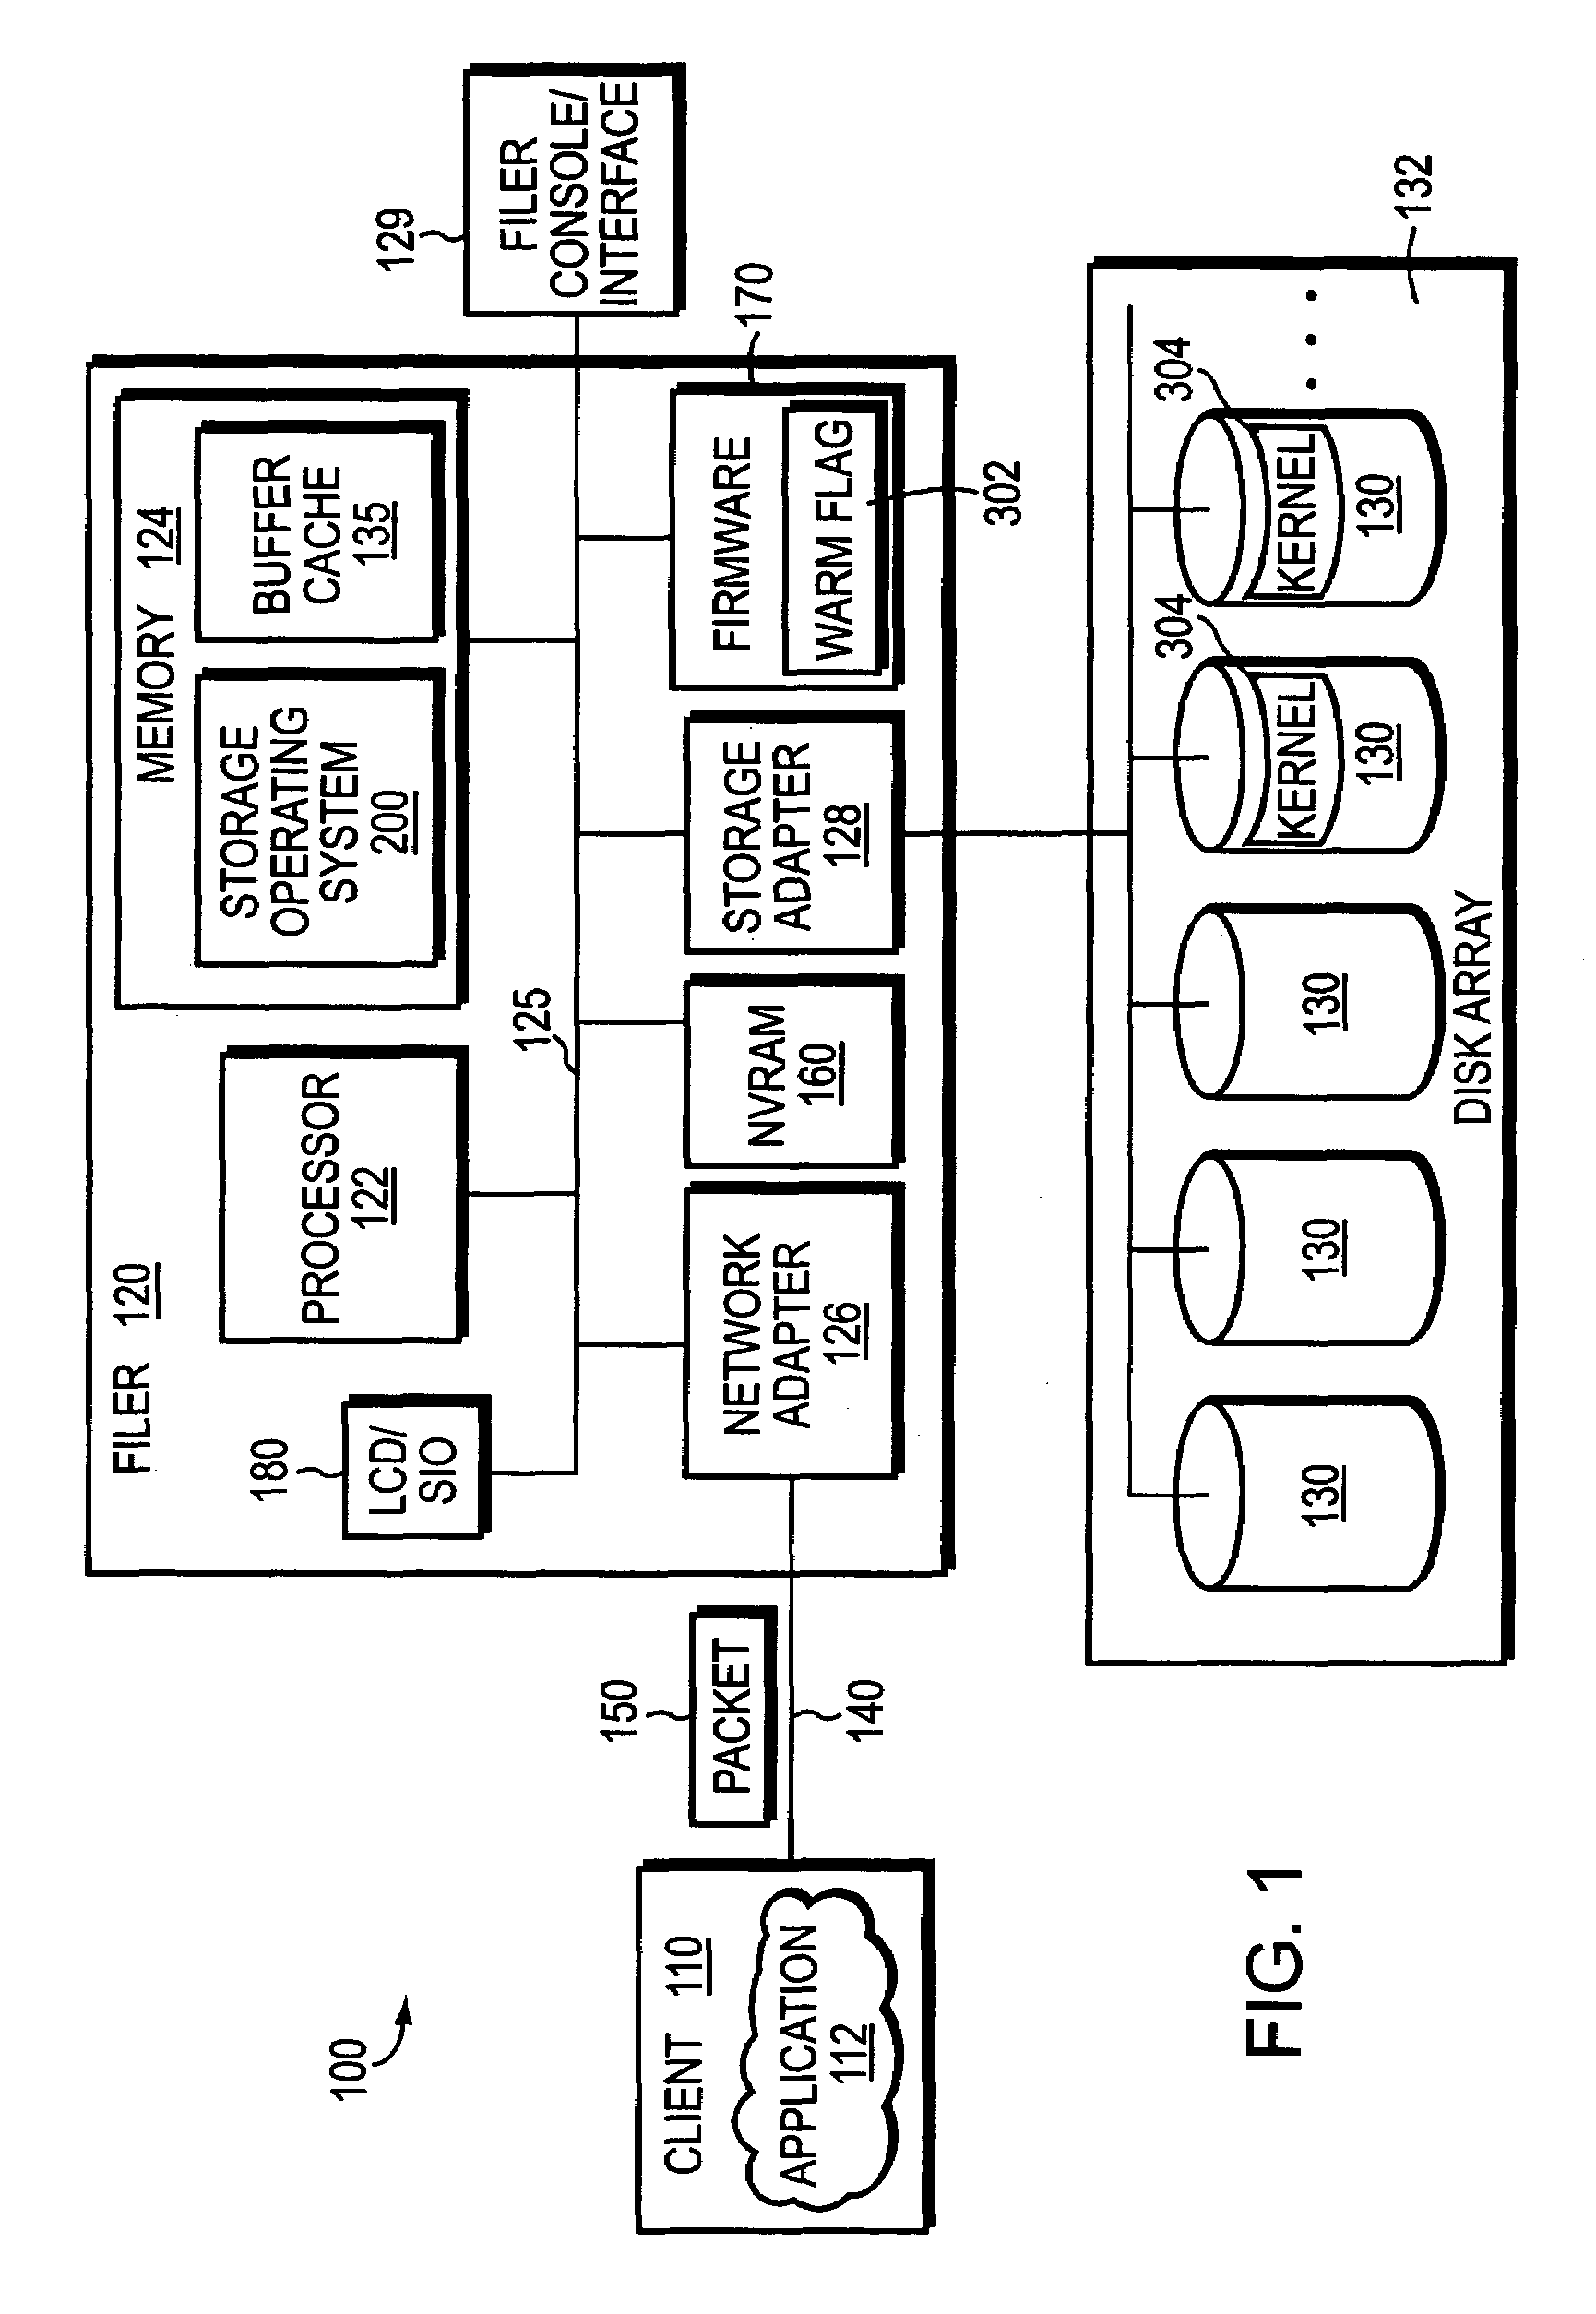 System and method for fast reboot of a file server